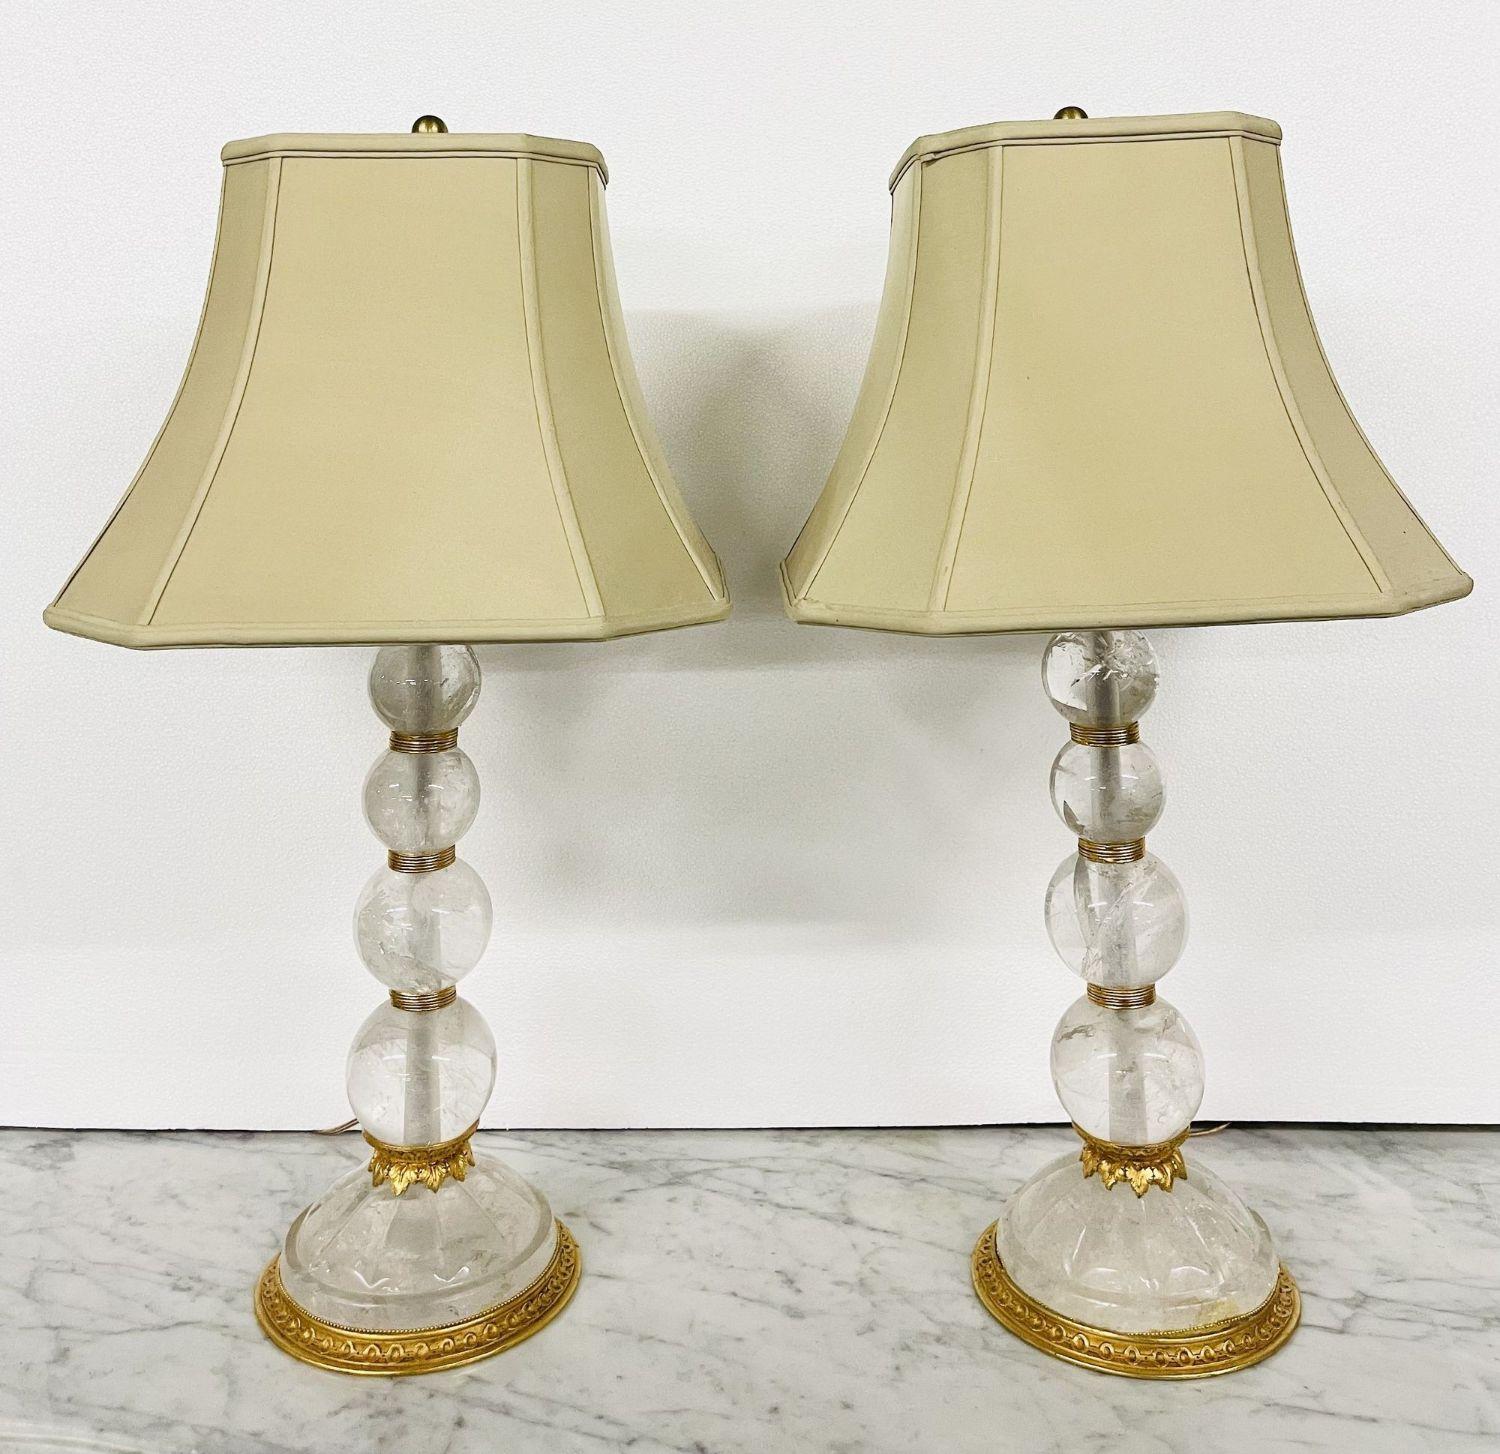 A pair of Baques Rock crystal table lamps having four circular spheres on a Rock Crystal base all separated by gilt bronze supports. Fine rock crystal on this suburb pair of French table lamps by this highly sought after designer. These are not